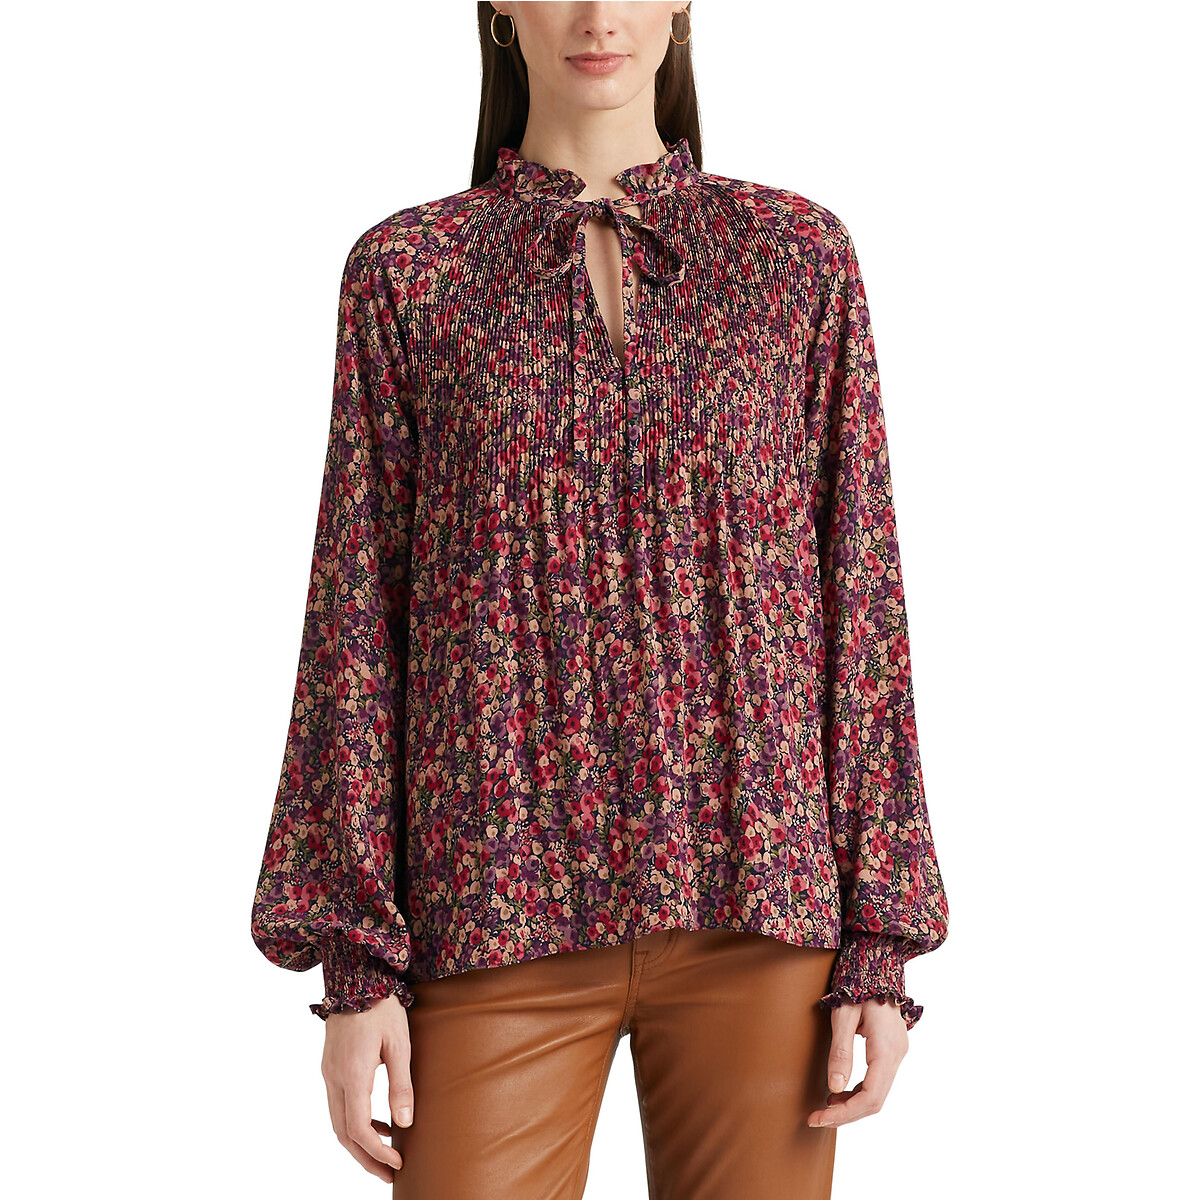 Vladmitus Floral Print Blouse with Pussy Bow